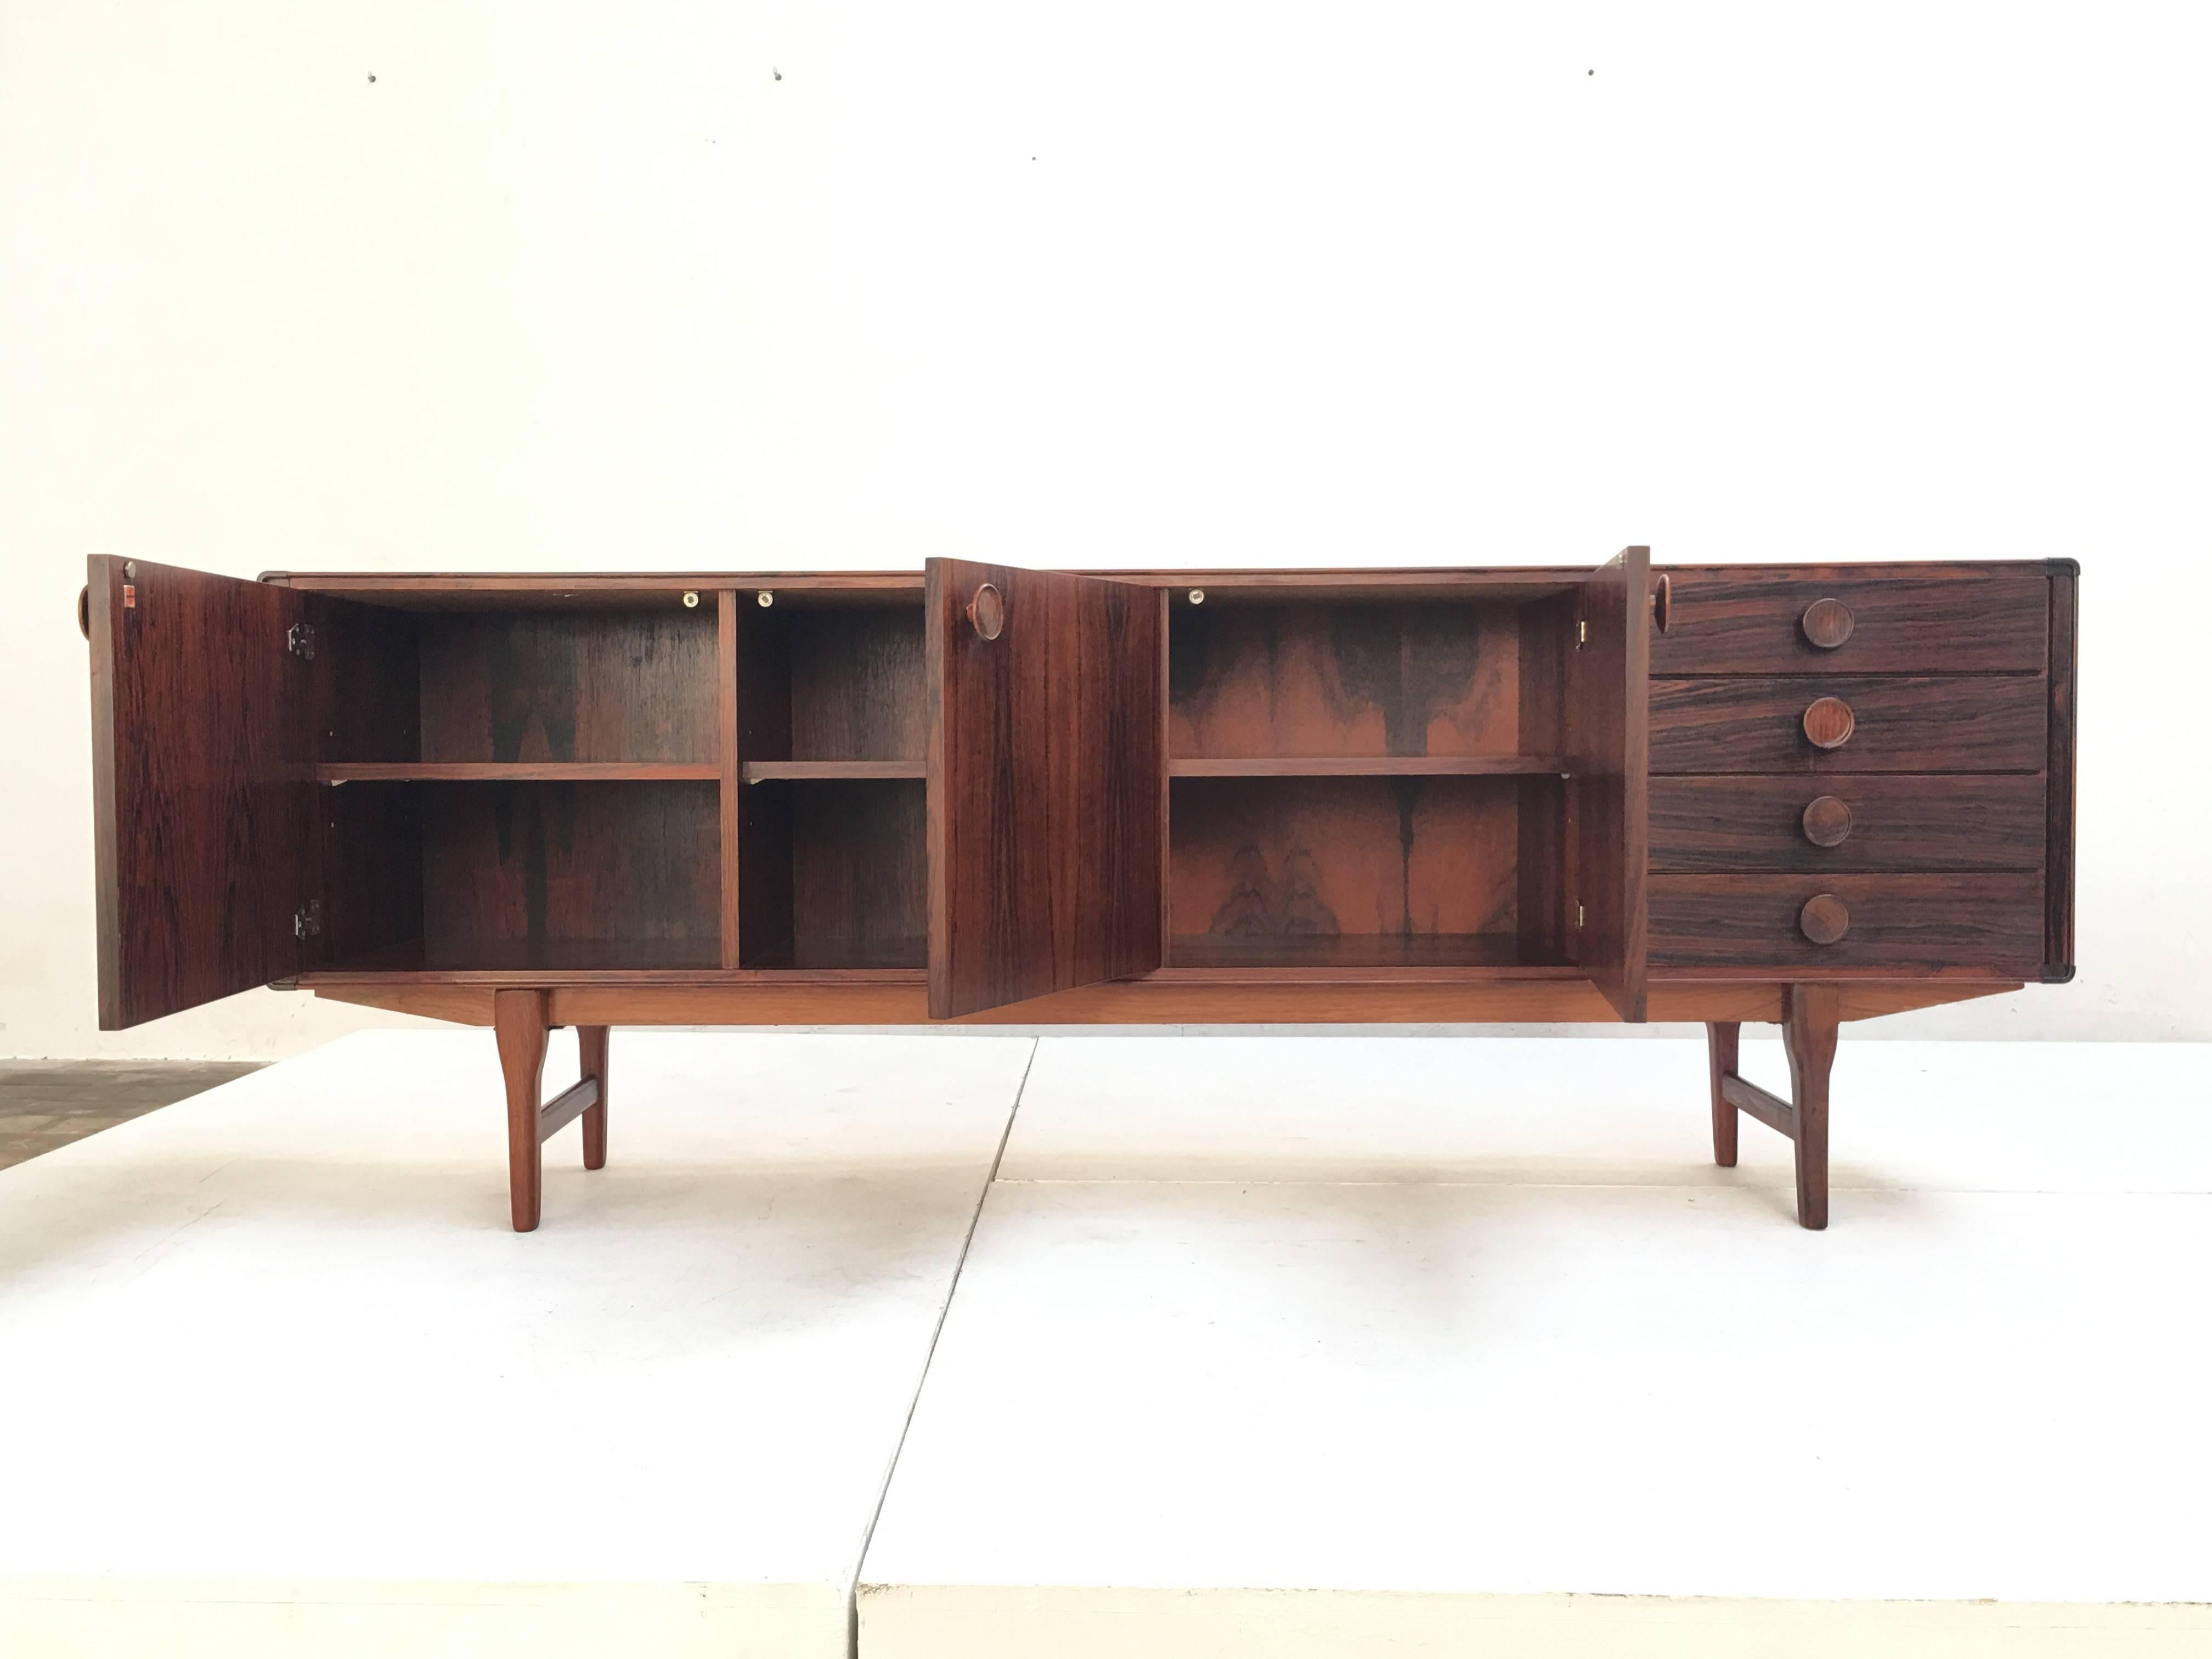 Beautiful 'FDT-1205' rosewood credenza designed by Dutch cabinetmaker Fristho Franeker in 1965. Signed with original Fristho enamel badge to the interior. The rare 'FDT-1205' cabinet is documented in the book 'Fristho vooruitstrevende meubelen